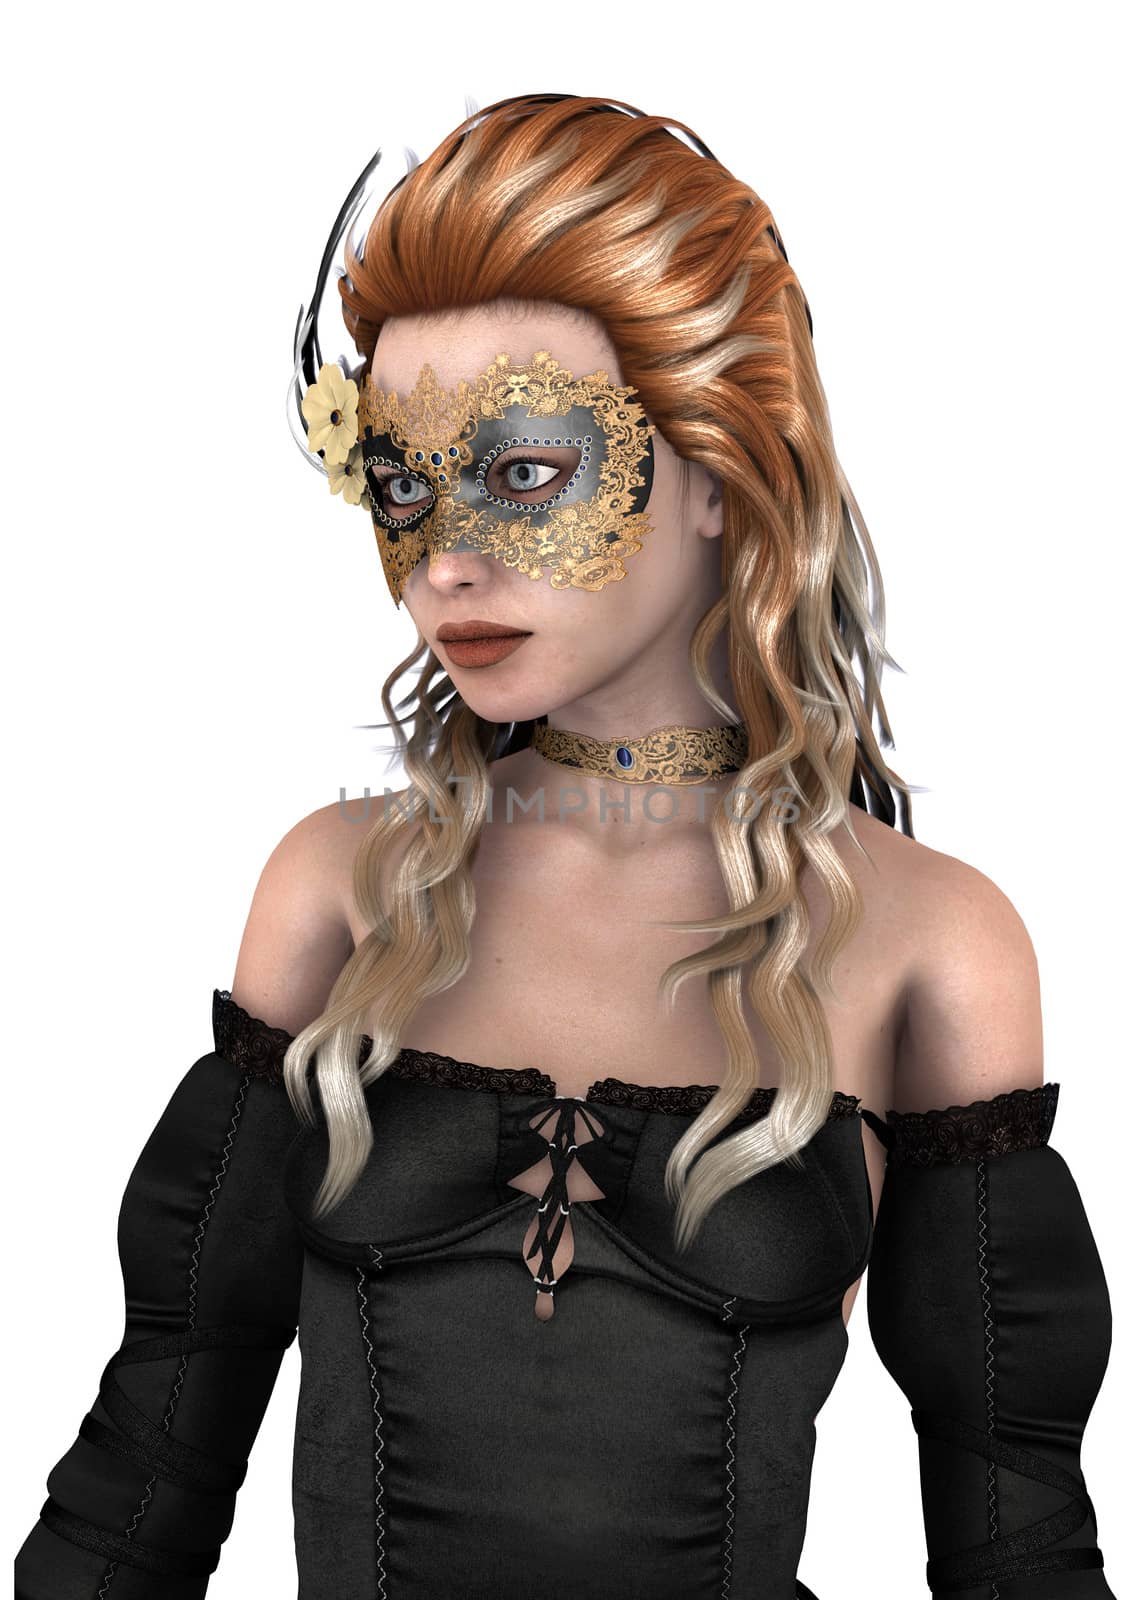 Beautiful Woman with Masquerade Mask by Vac